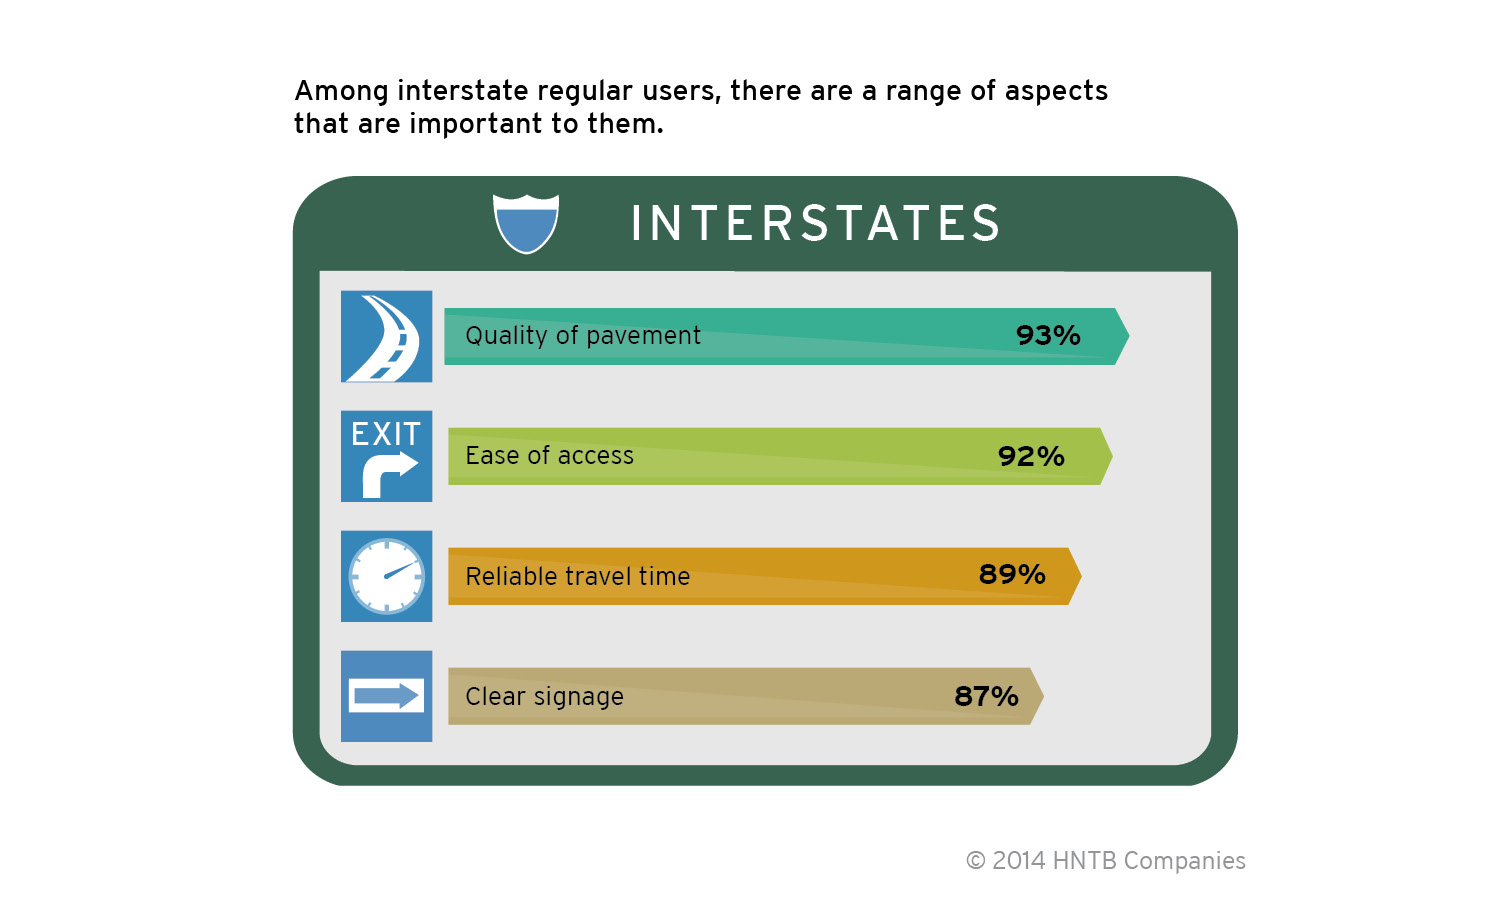 Among interstate regular users, quality of pavement, ease of access, reliable travel time and clear signage are among the roadway aspects important to them.